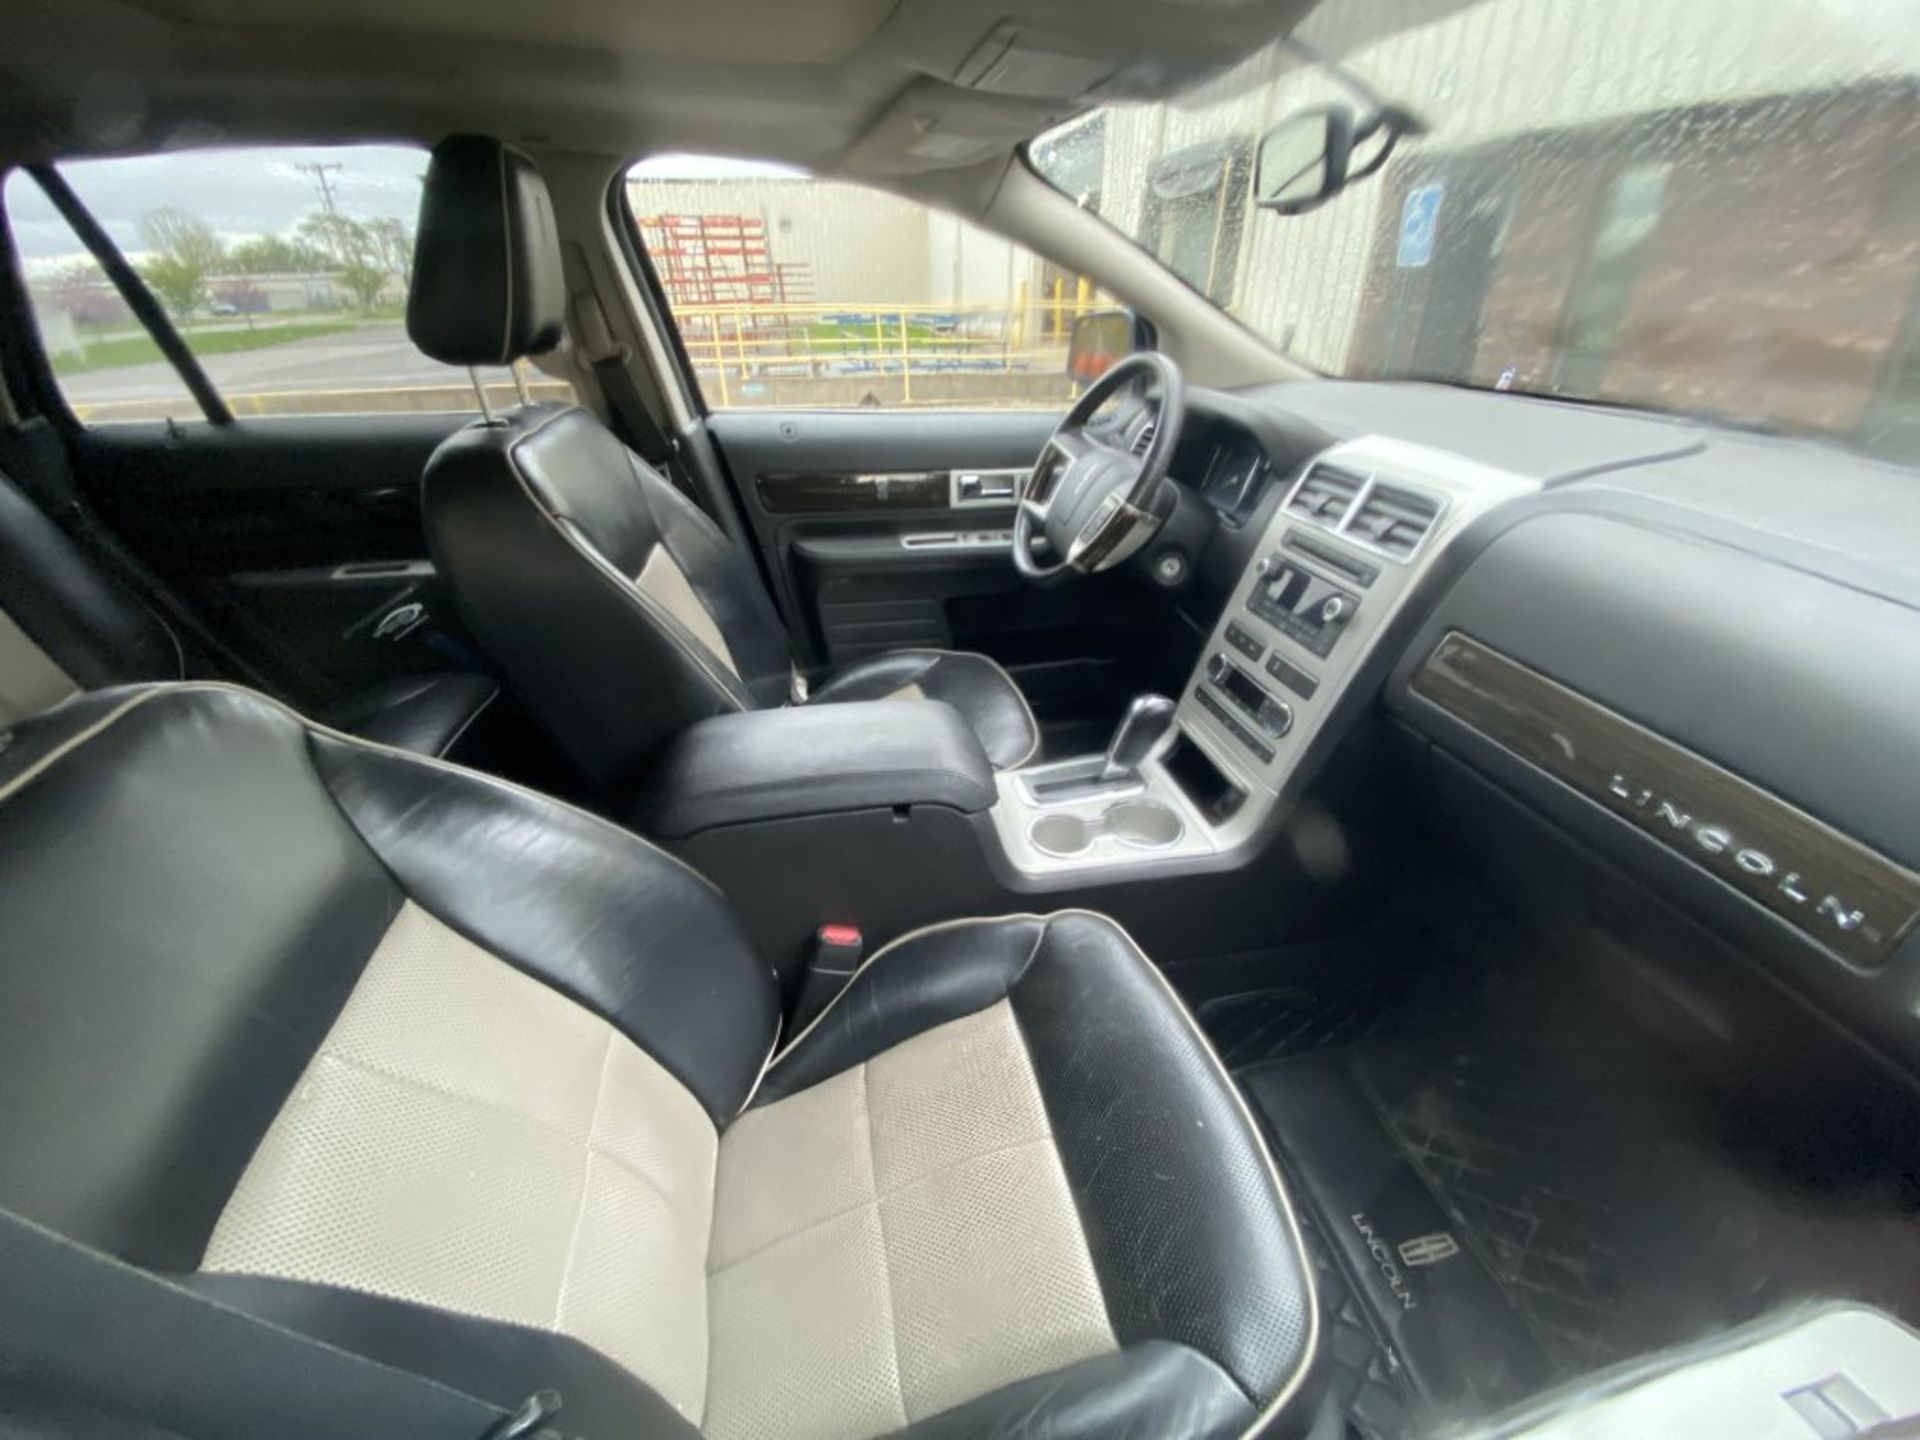 2008 LINCOLN MKX LIMITED EDITION, AUTO TRANS, AM/FM-CD-AUX, HEAT/AC SEATS, MOONROOF, PW, PL, - Image 15 of 21